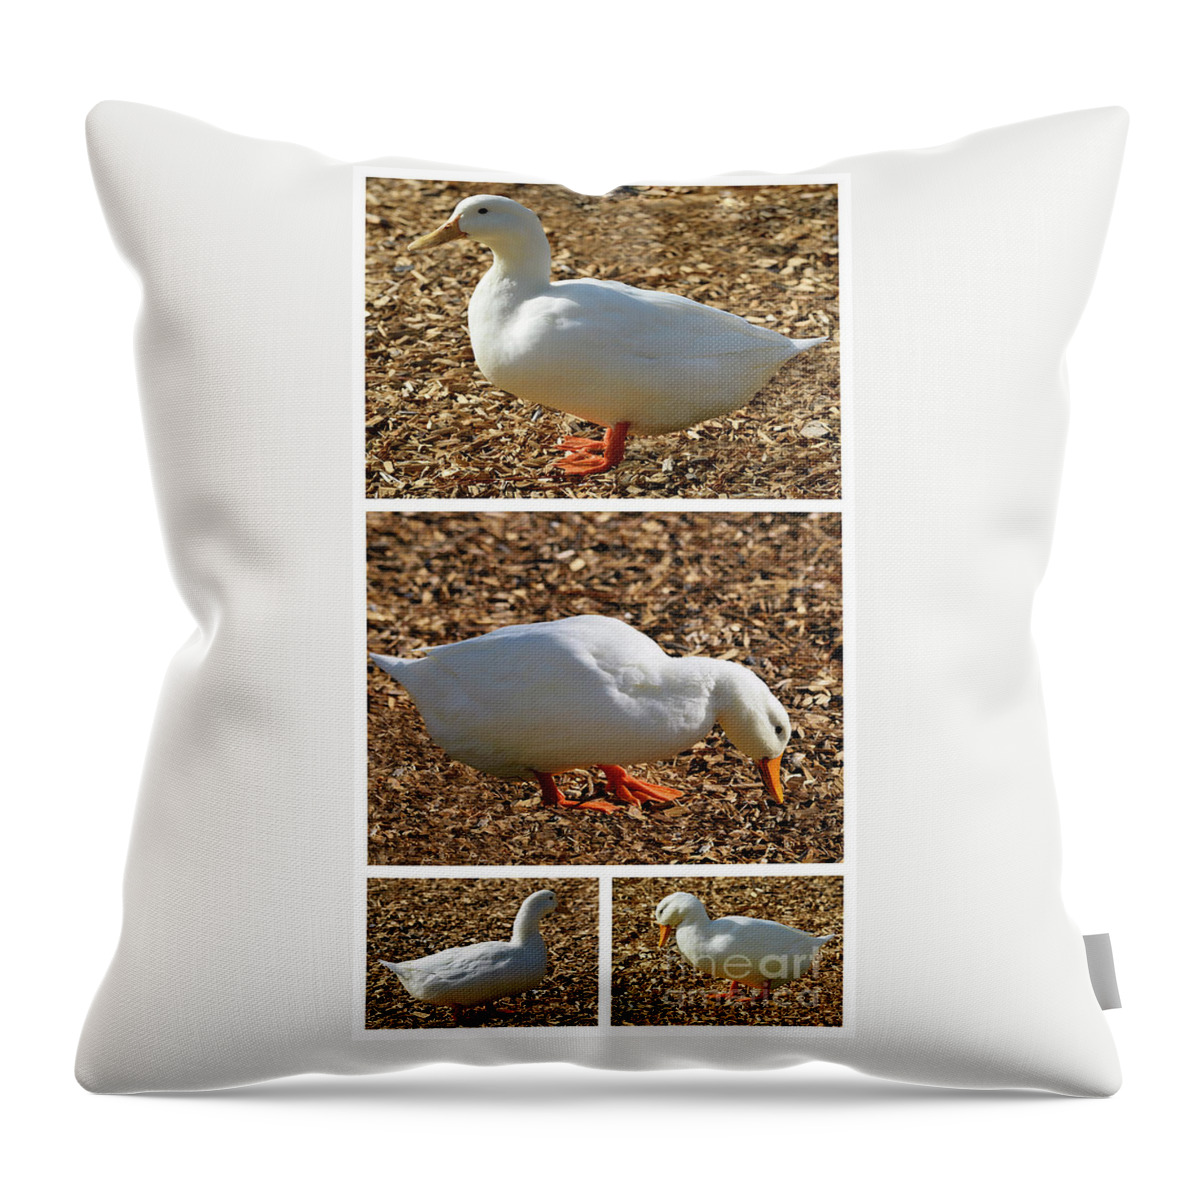 Masartstudio Throw Pillow featuring the mixed media Duck Collage Mixed Media A51517 by Mas Art Studio